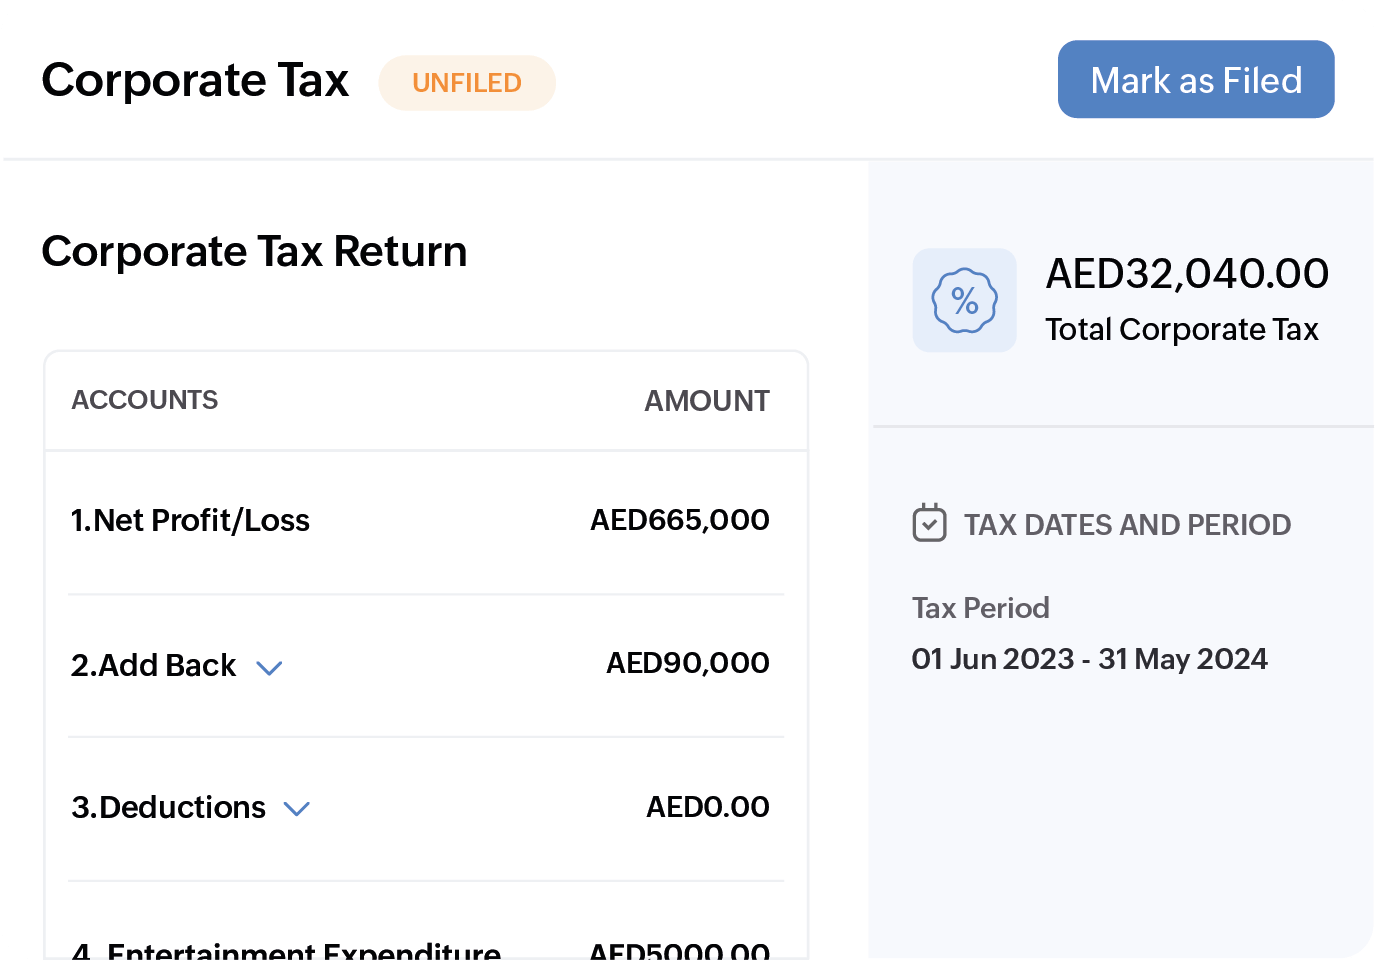 File your Corporate Tax in UAE easily by generating returns in Zoho Books